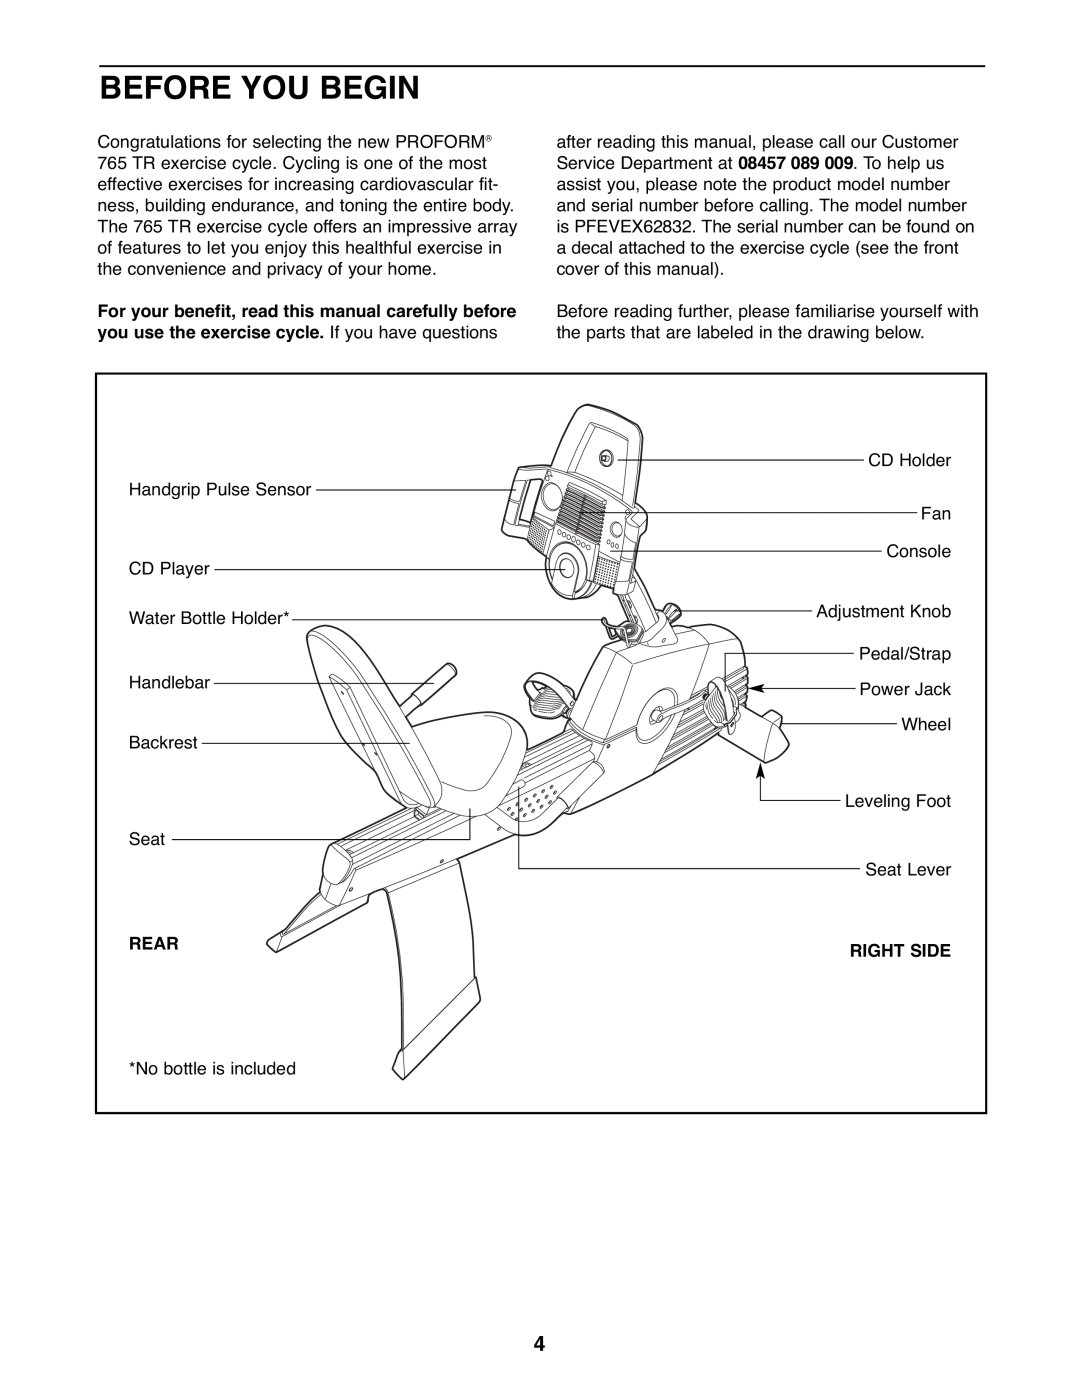 ProForm PFEVEX62832 user manual Before You Begin, Rear, Right Side 